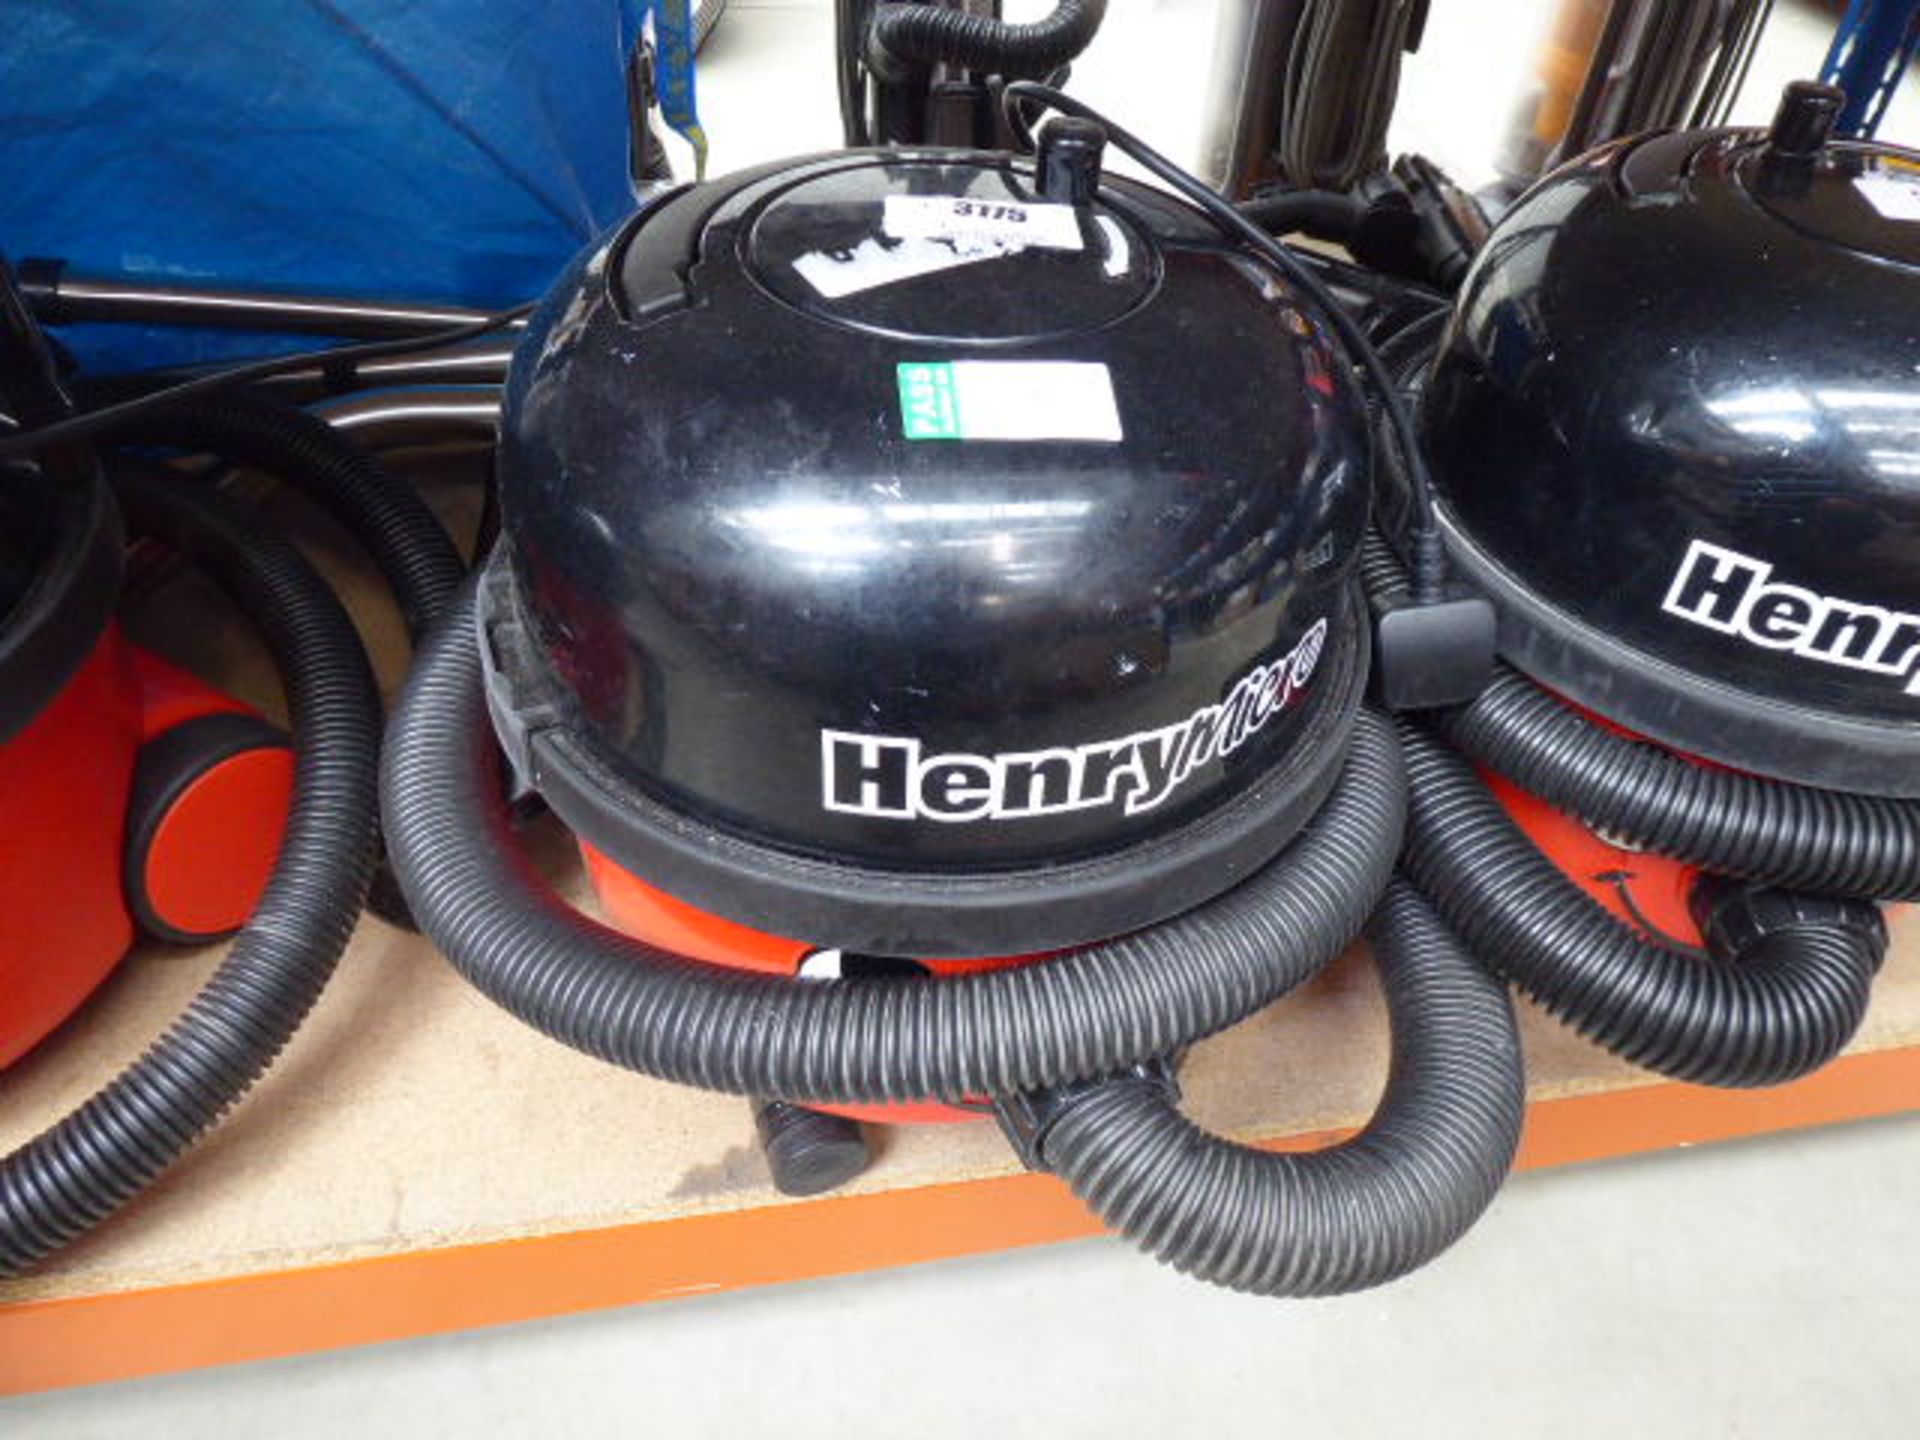 (TN69) - Henry Micro vacuum cleaner with pole